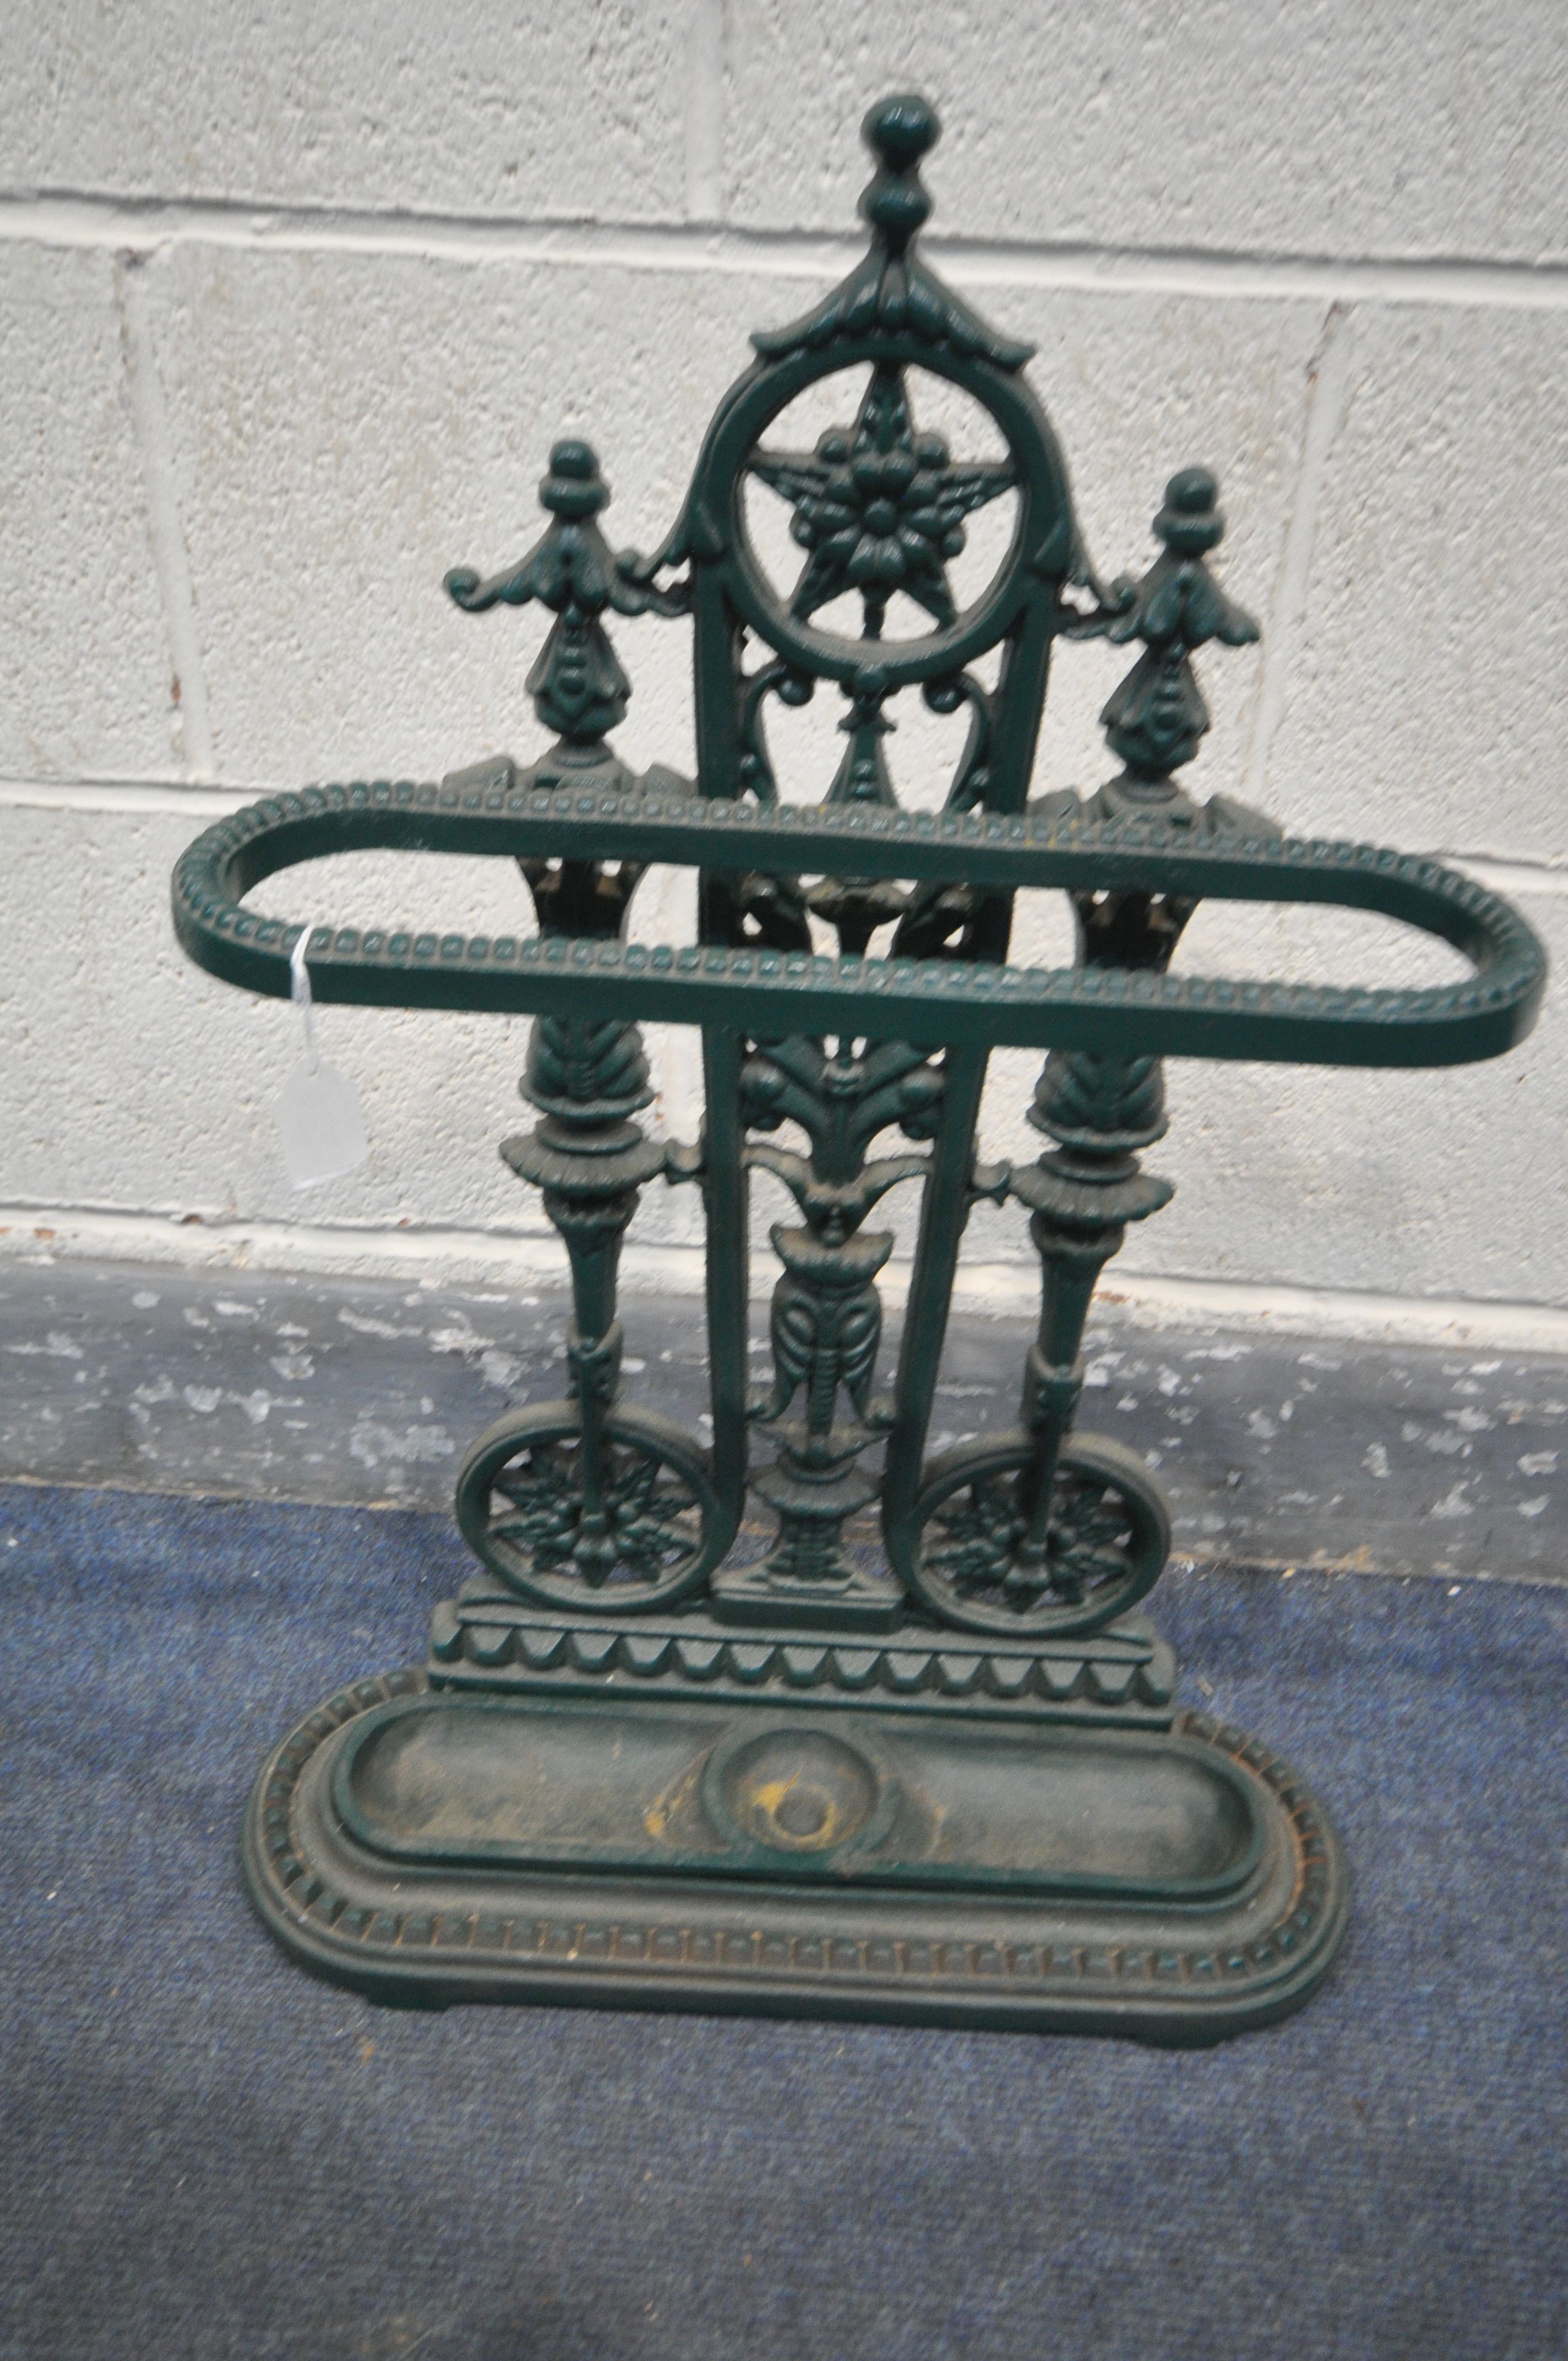 A CAST IRON UMBRELLA STAND, with drip tray, in a green finish, width 50cm x depth 16cm x height